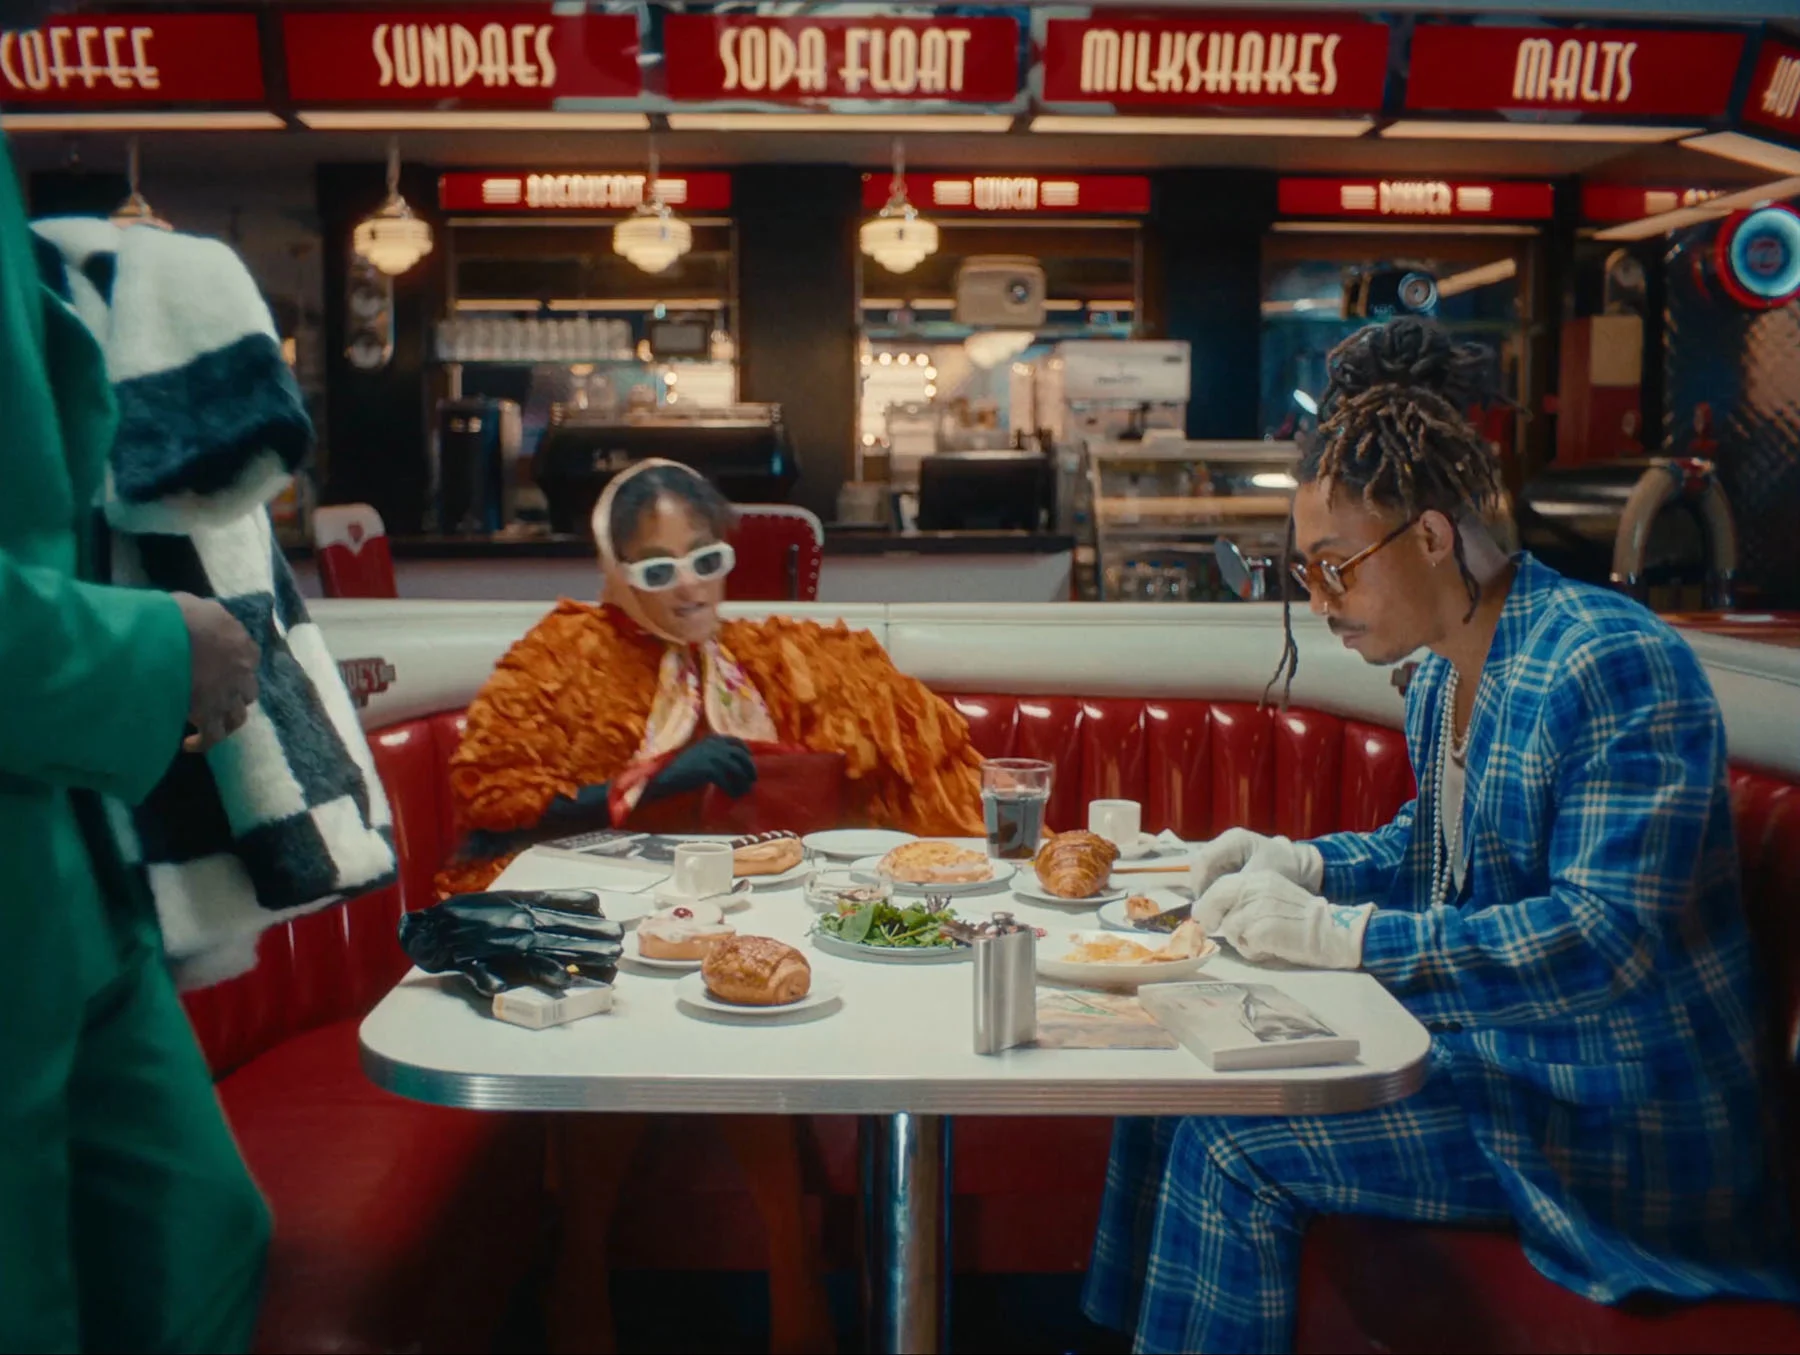 A video of three people—two men wearing suits and a woman in an orange outfit with sunglasses and a headscarf—take their seats at an American-style diner around a table filled with food and drinks.